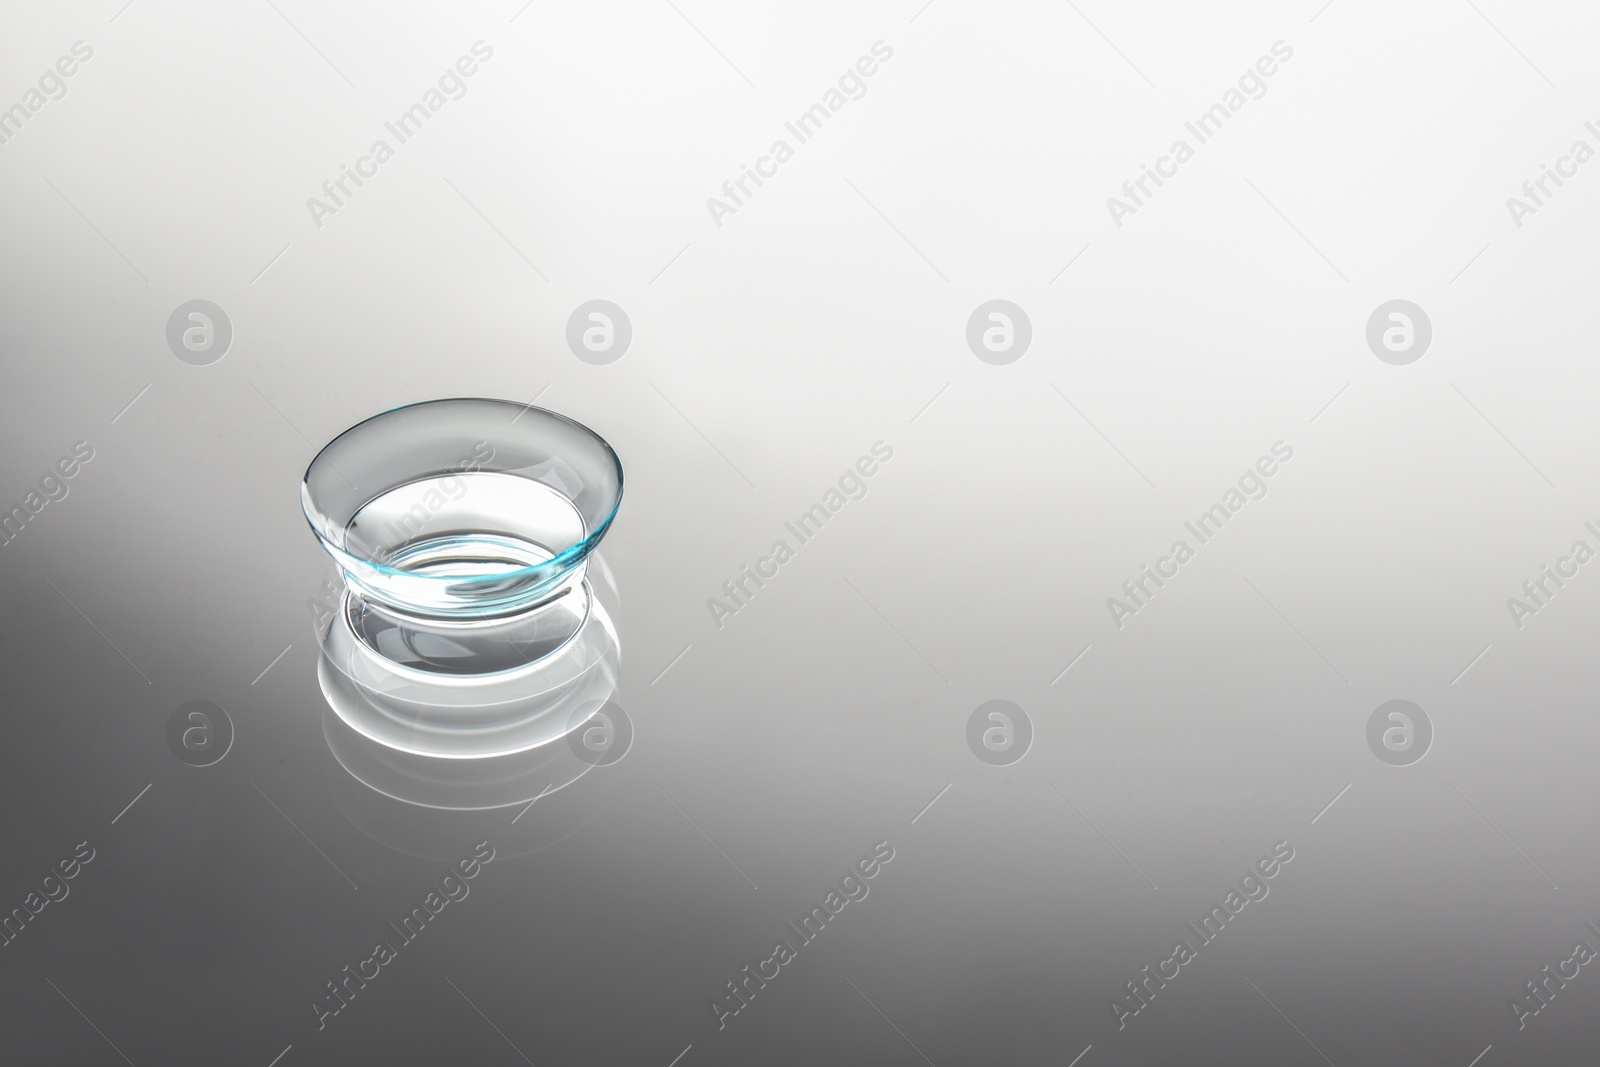 Photo of Contact lens on grey background